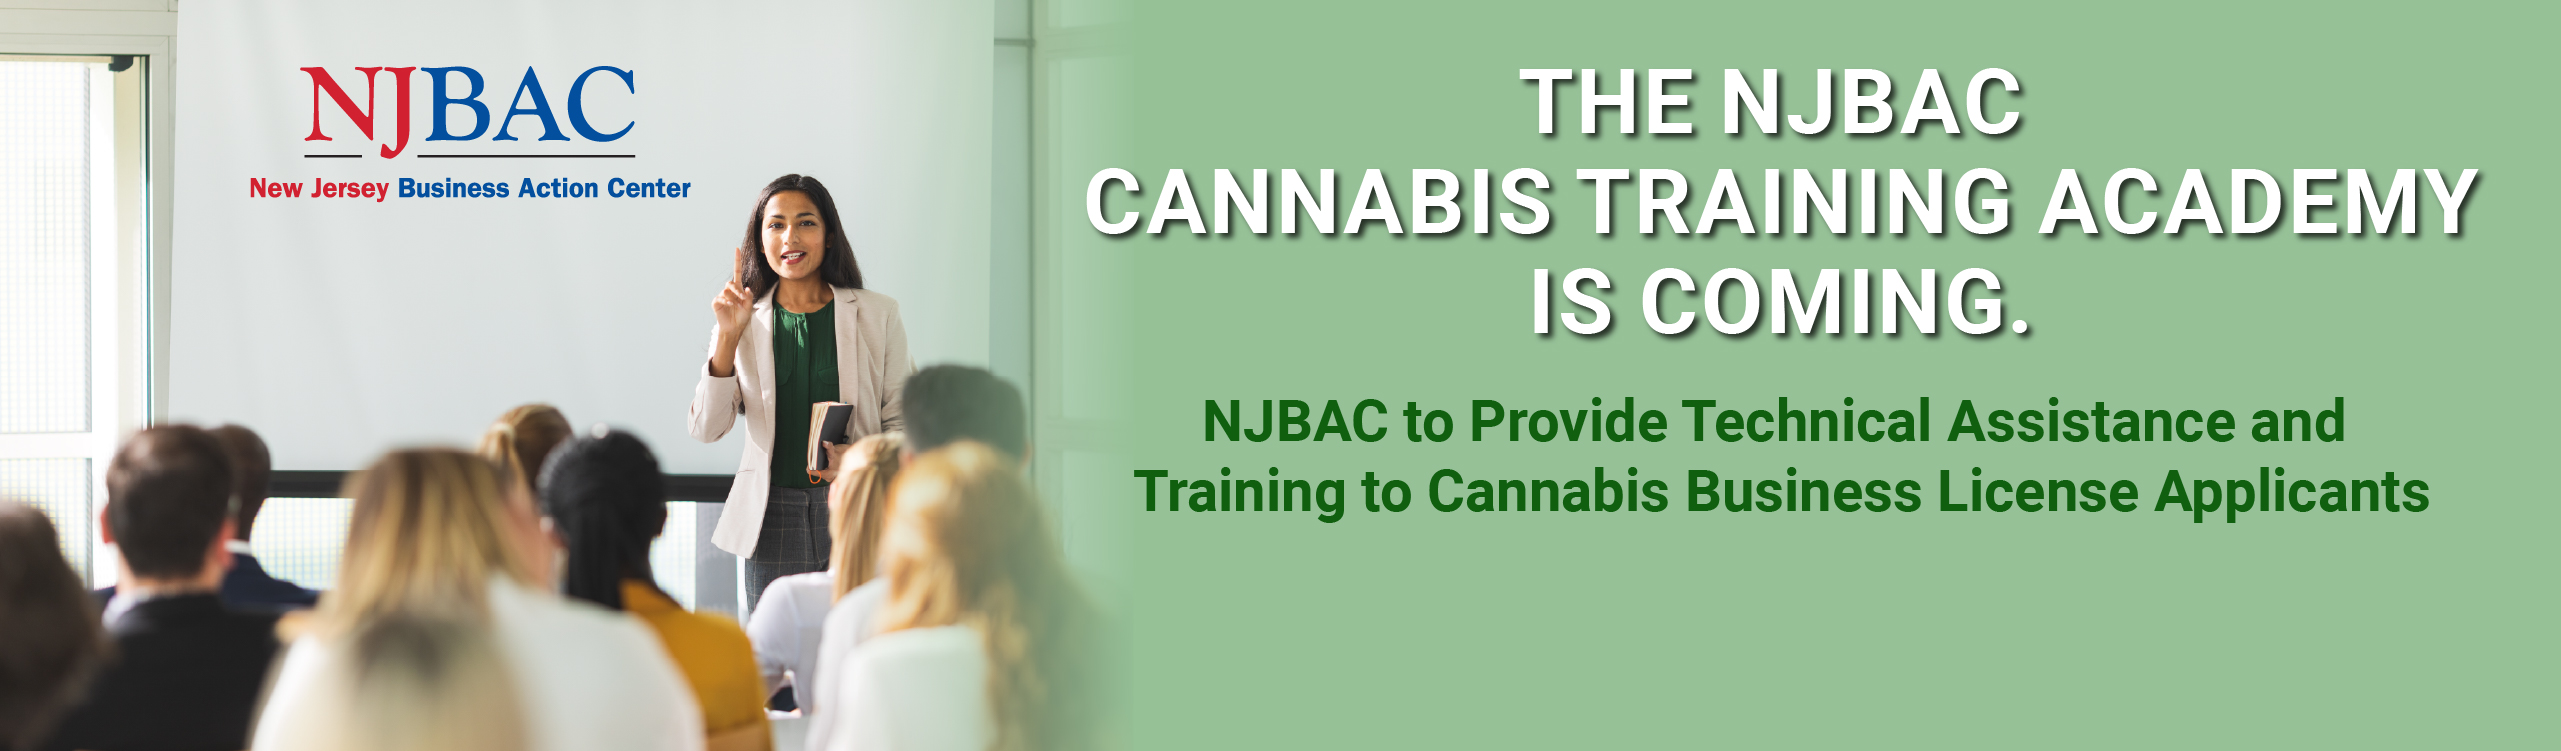 The NJBAC Cannabis Training Academy is coming. NJBAC to provide technical assistance and training to cannabis business license applicants.